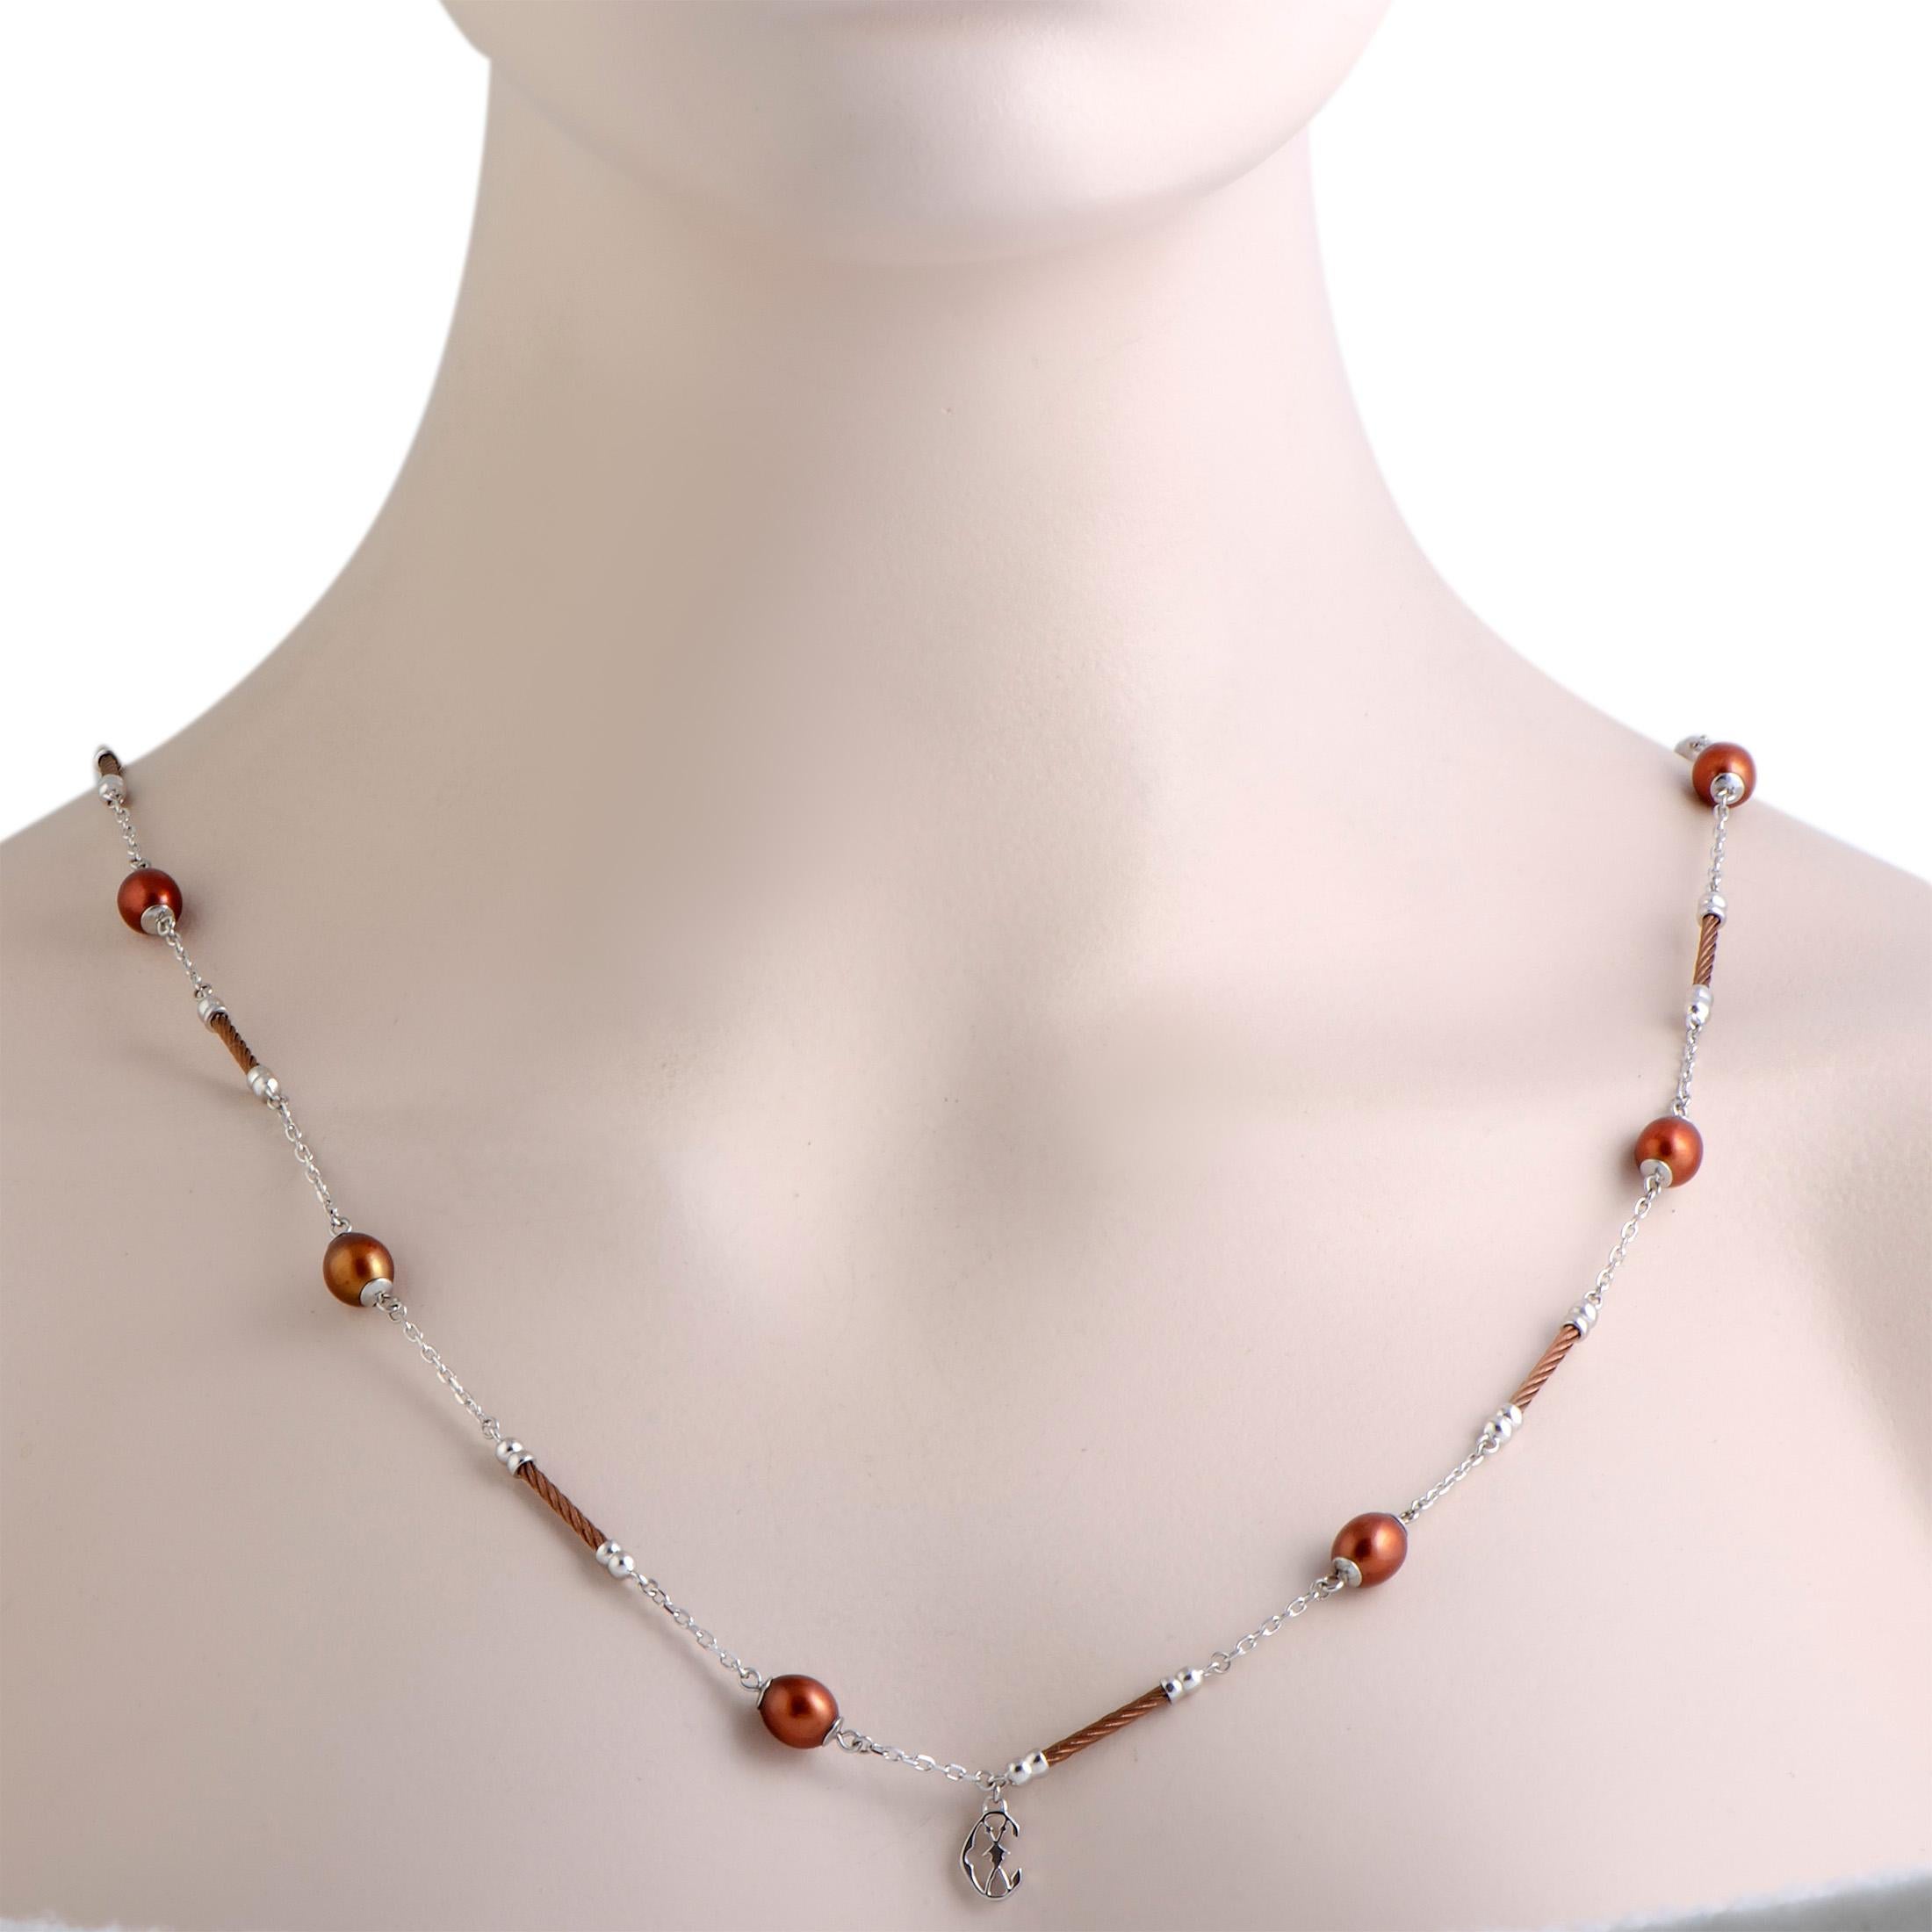 Add an incredibly attractive twist to your ensembles with this fascinating “Pearl” necklace from Charriol that is designed in a splendidly refined manner and beautifully decorated with gorgeous brown pearls. The necklace is made of stainless steel,